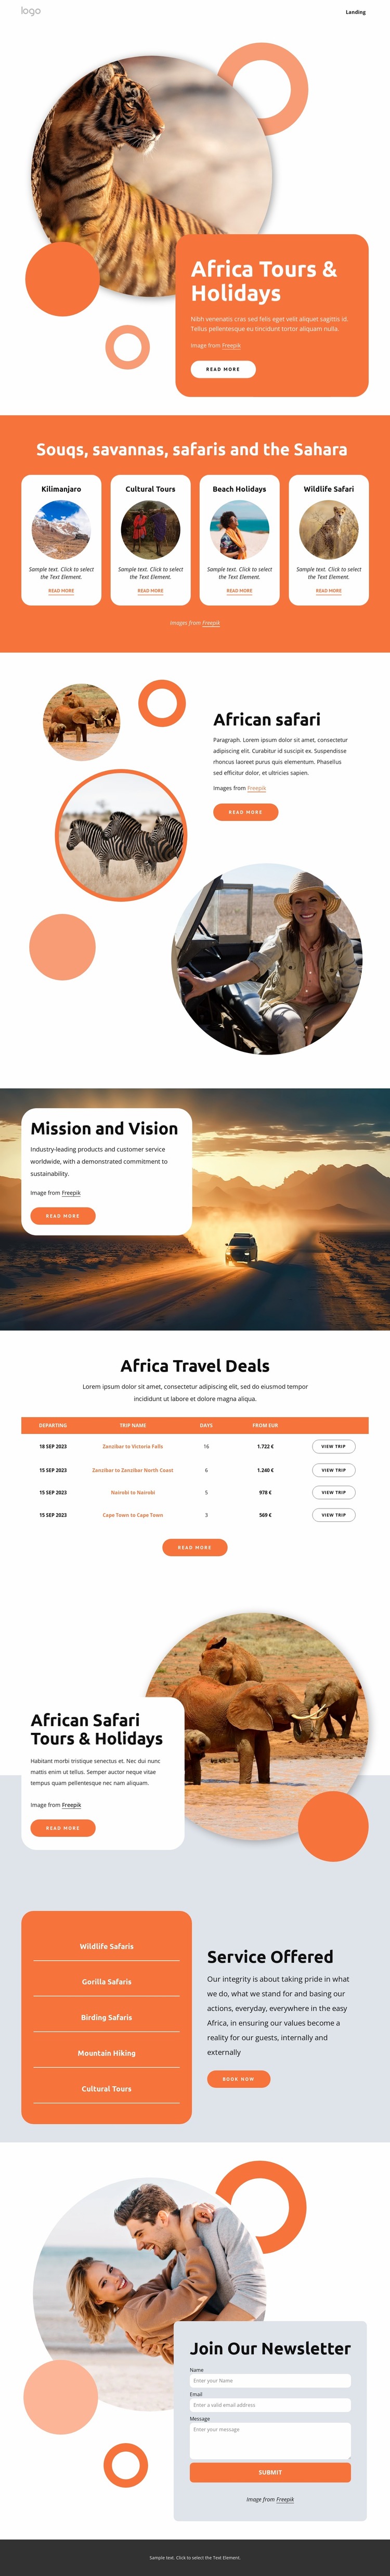 Africa tours and holidays Website Mockup